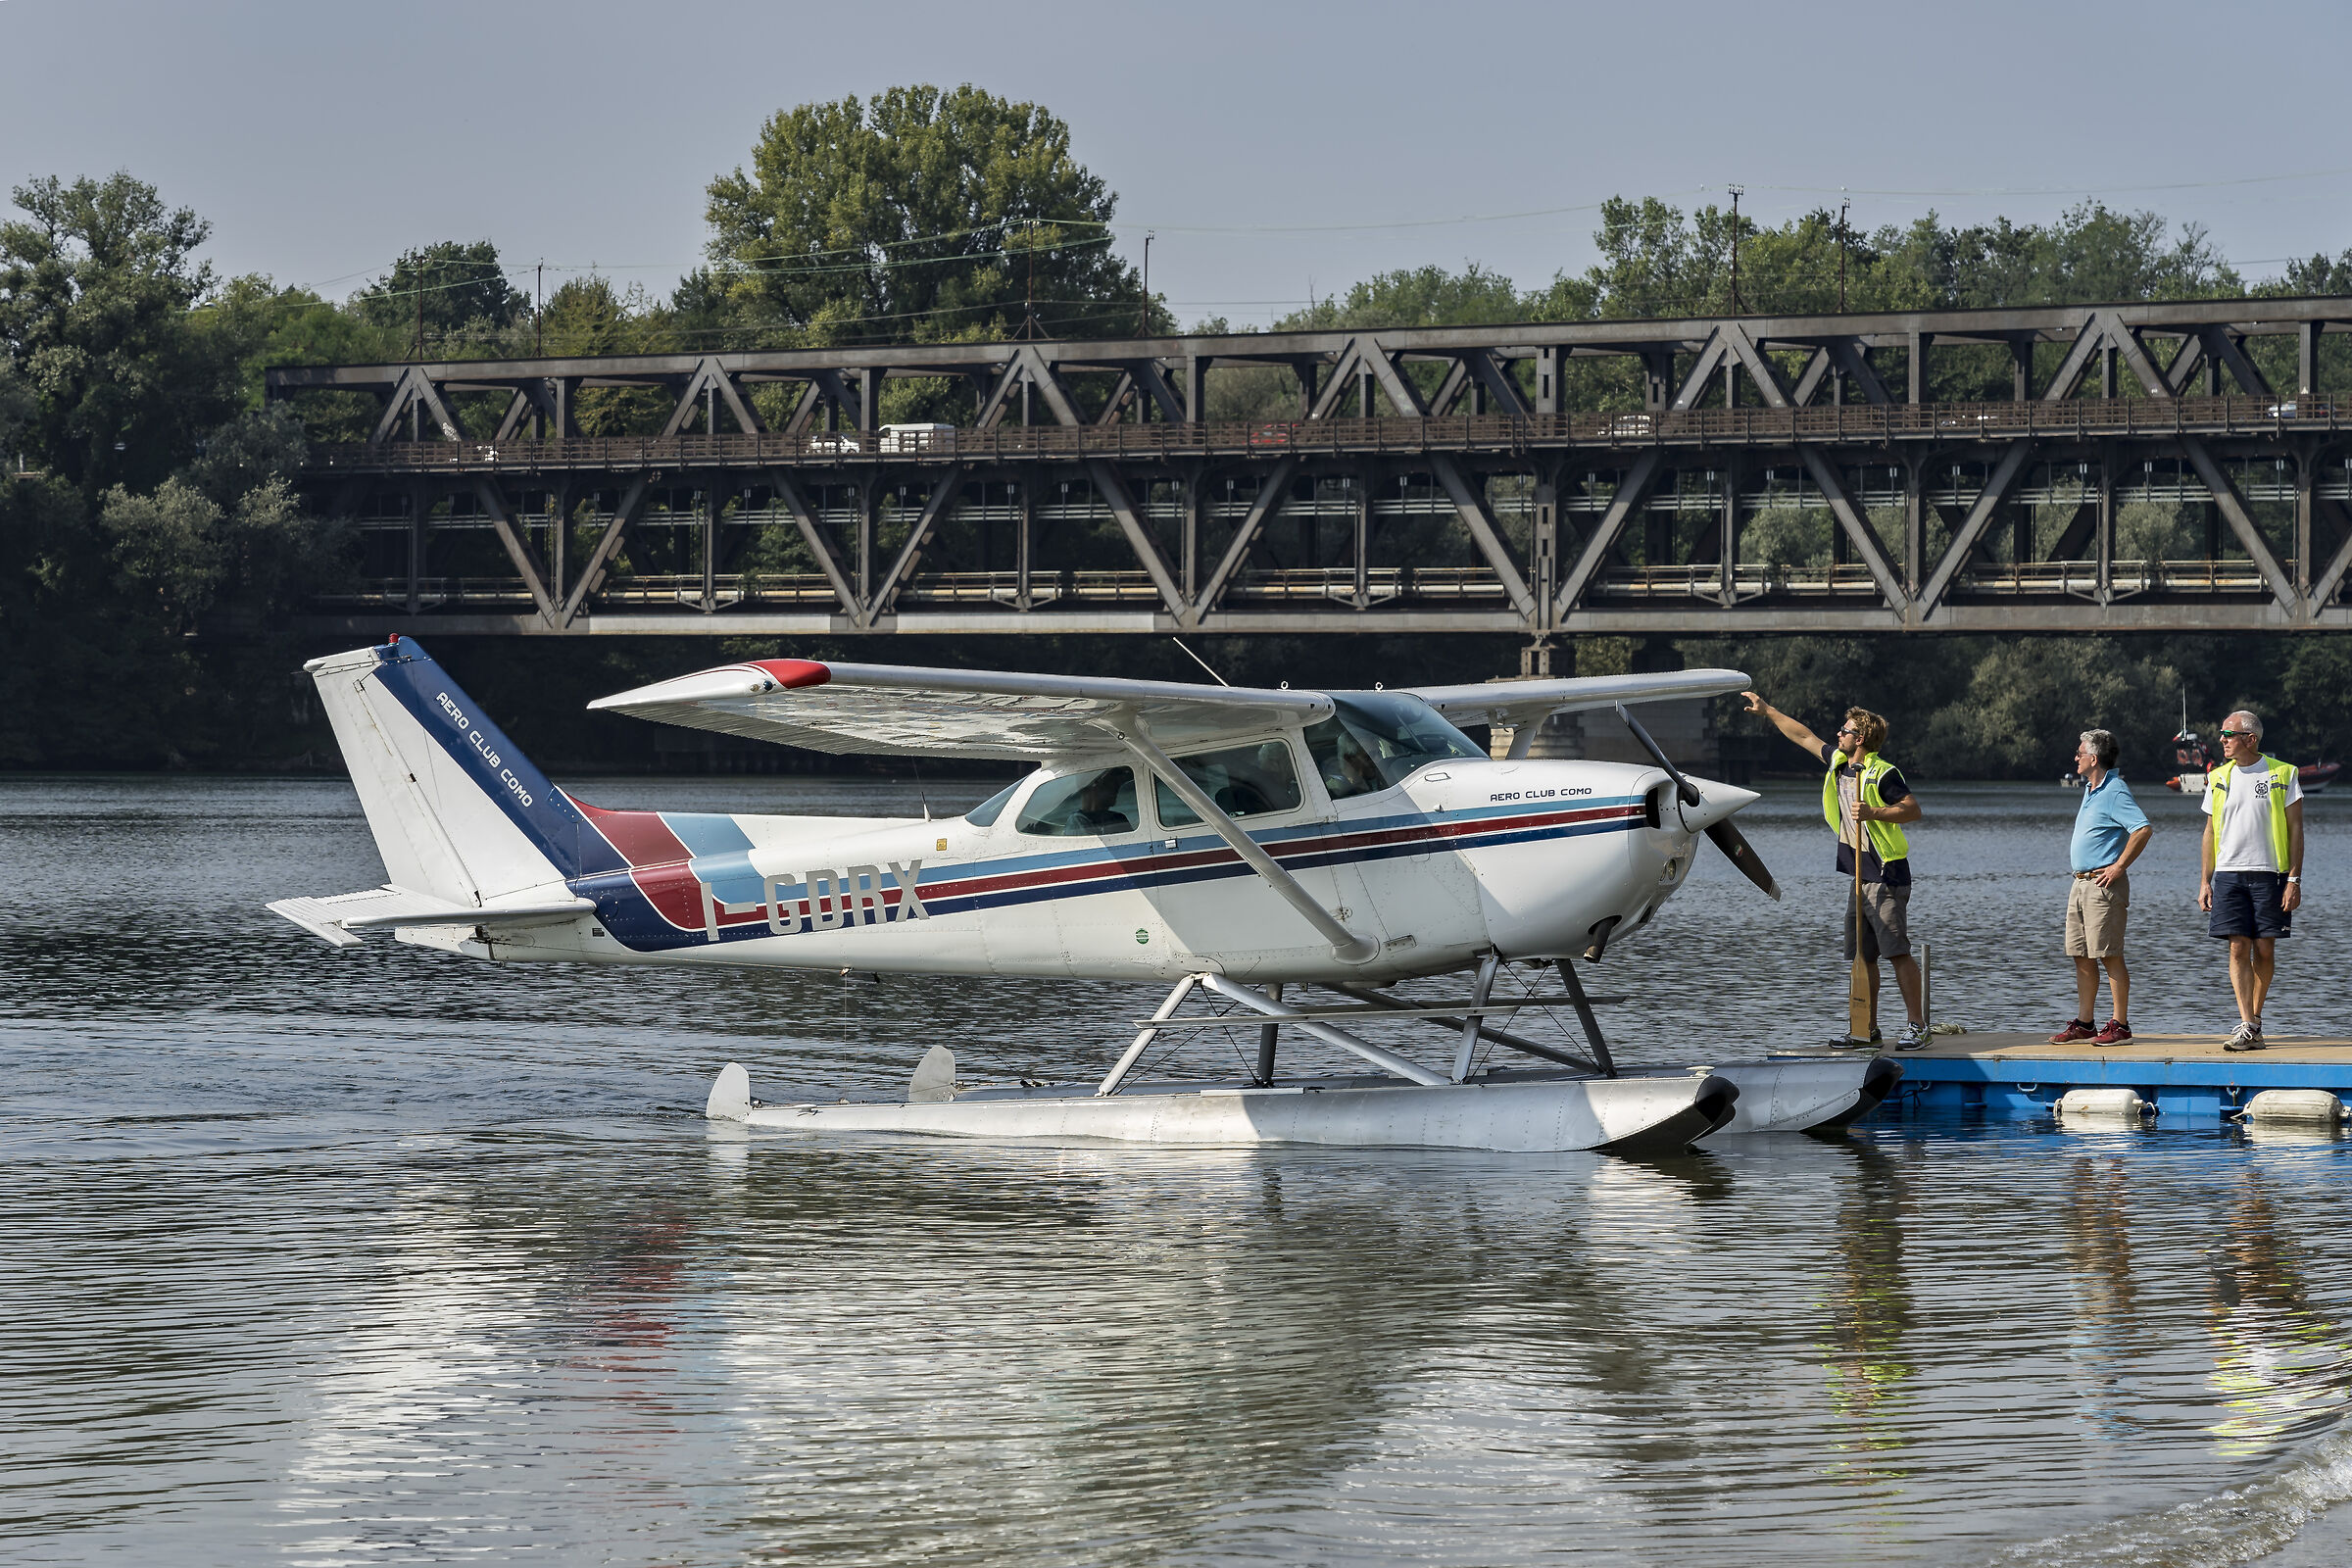 Docking of the Cessna 172 "Skyhawk" i-gdrx at the wharf - 3...